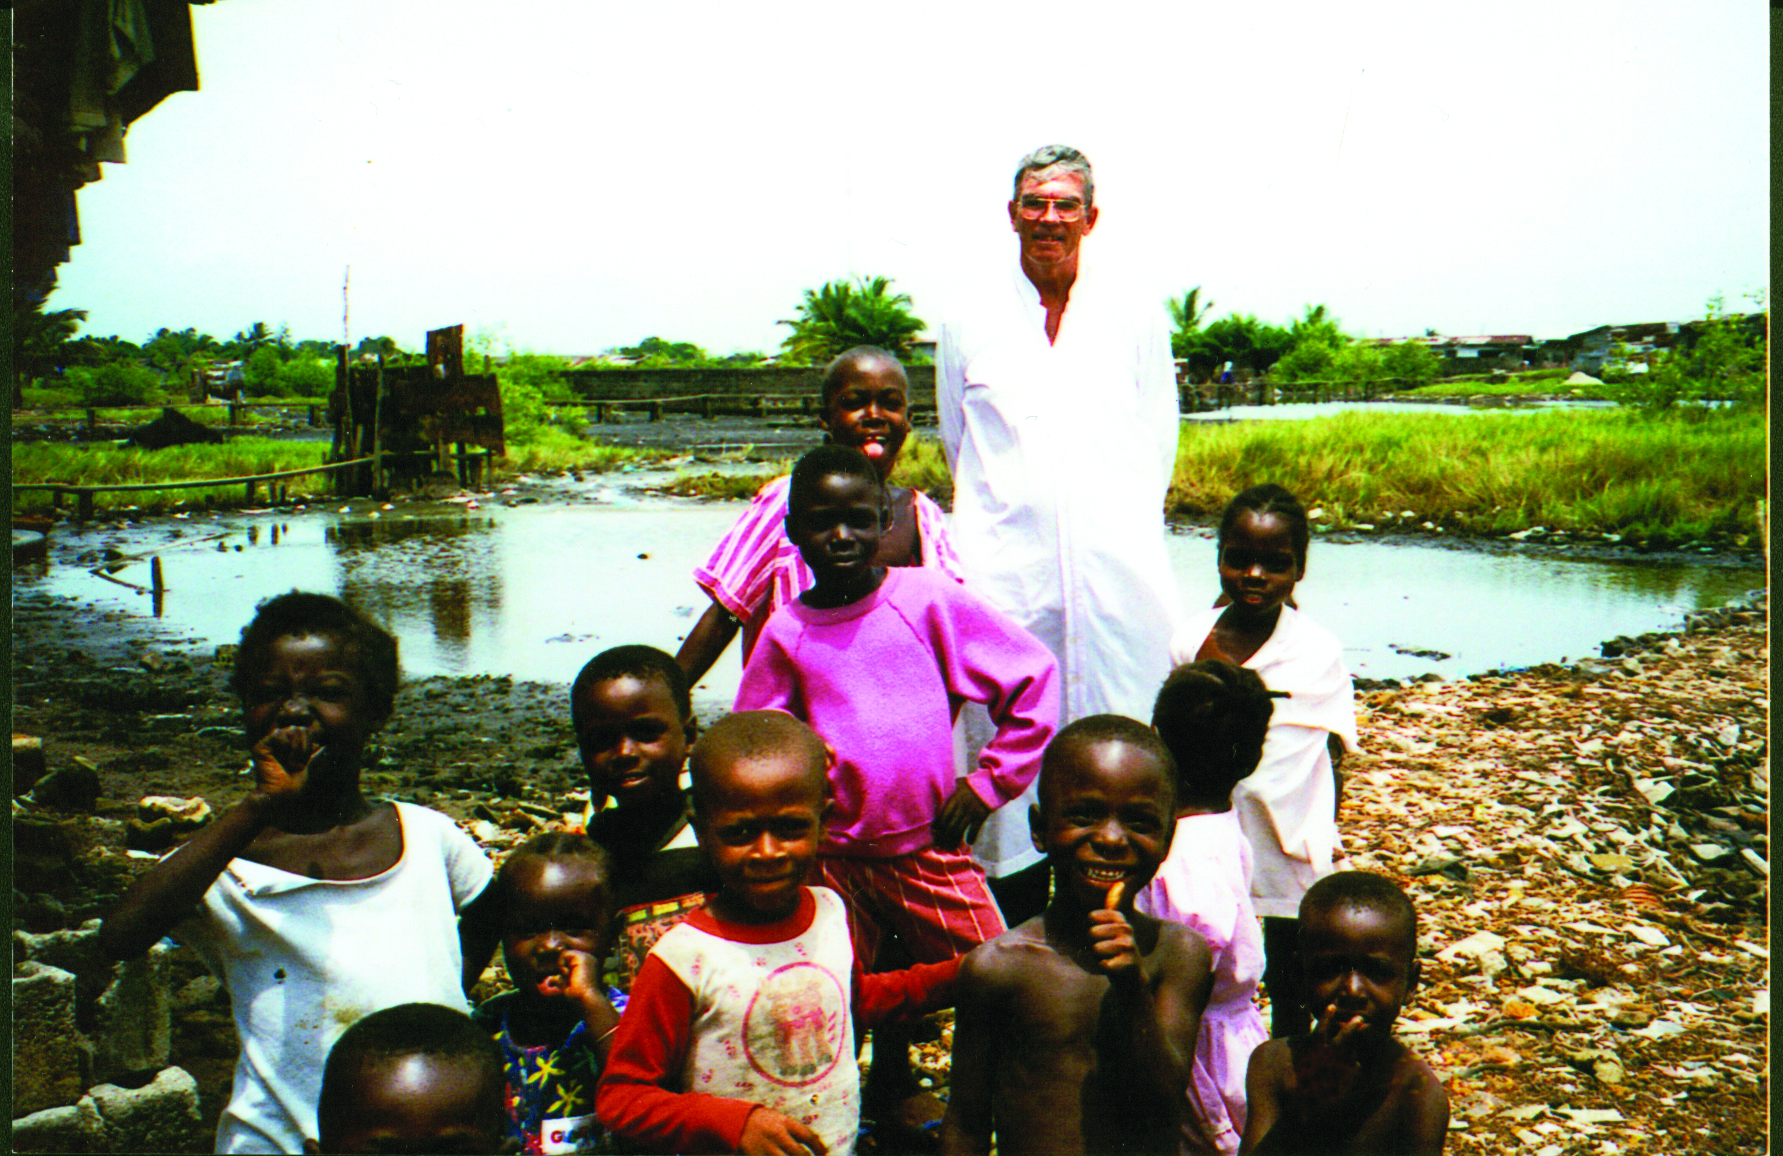 The people of Liberia—men women, and children—continually teach me about God’s grace and hope.